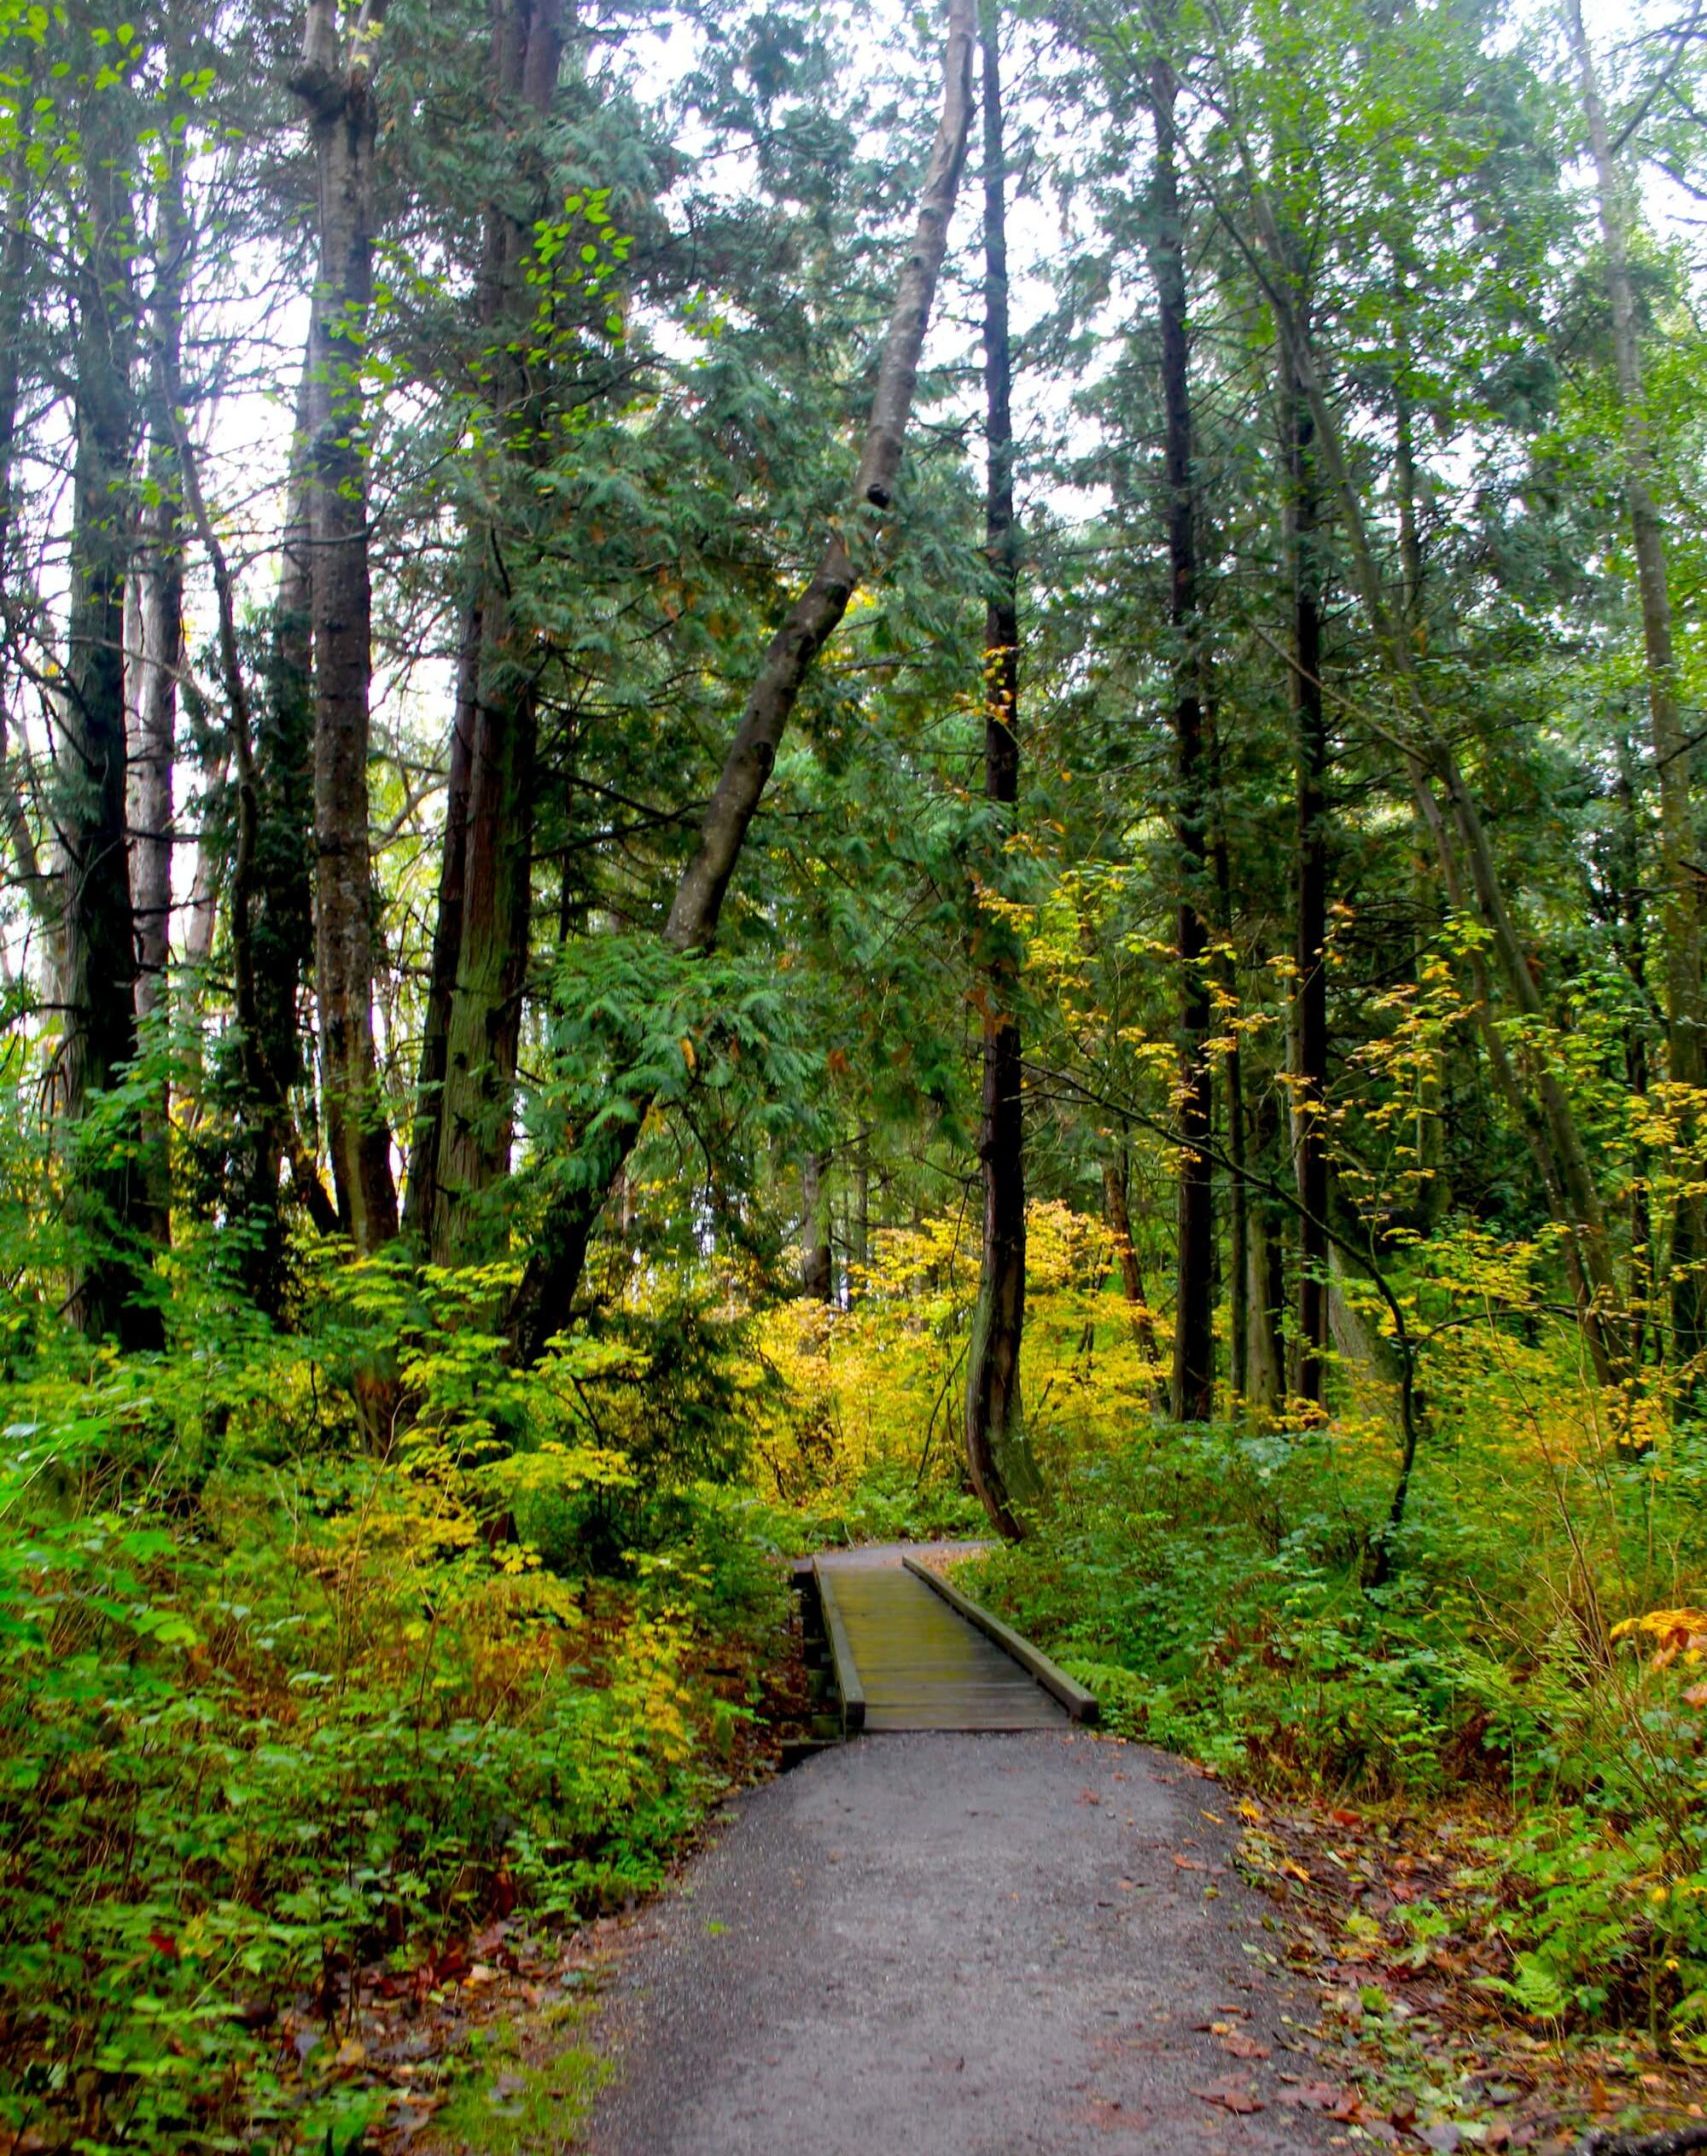 A forested trail with evergreens, a small wood footbridge, and green foliage.